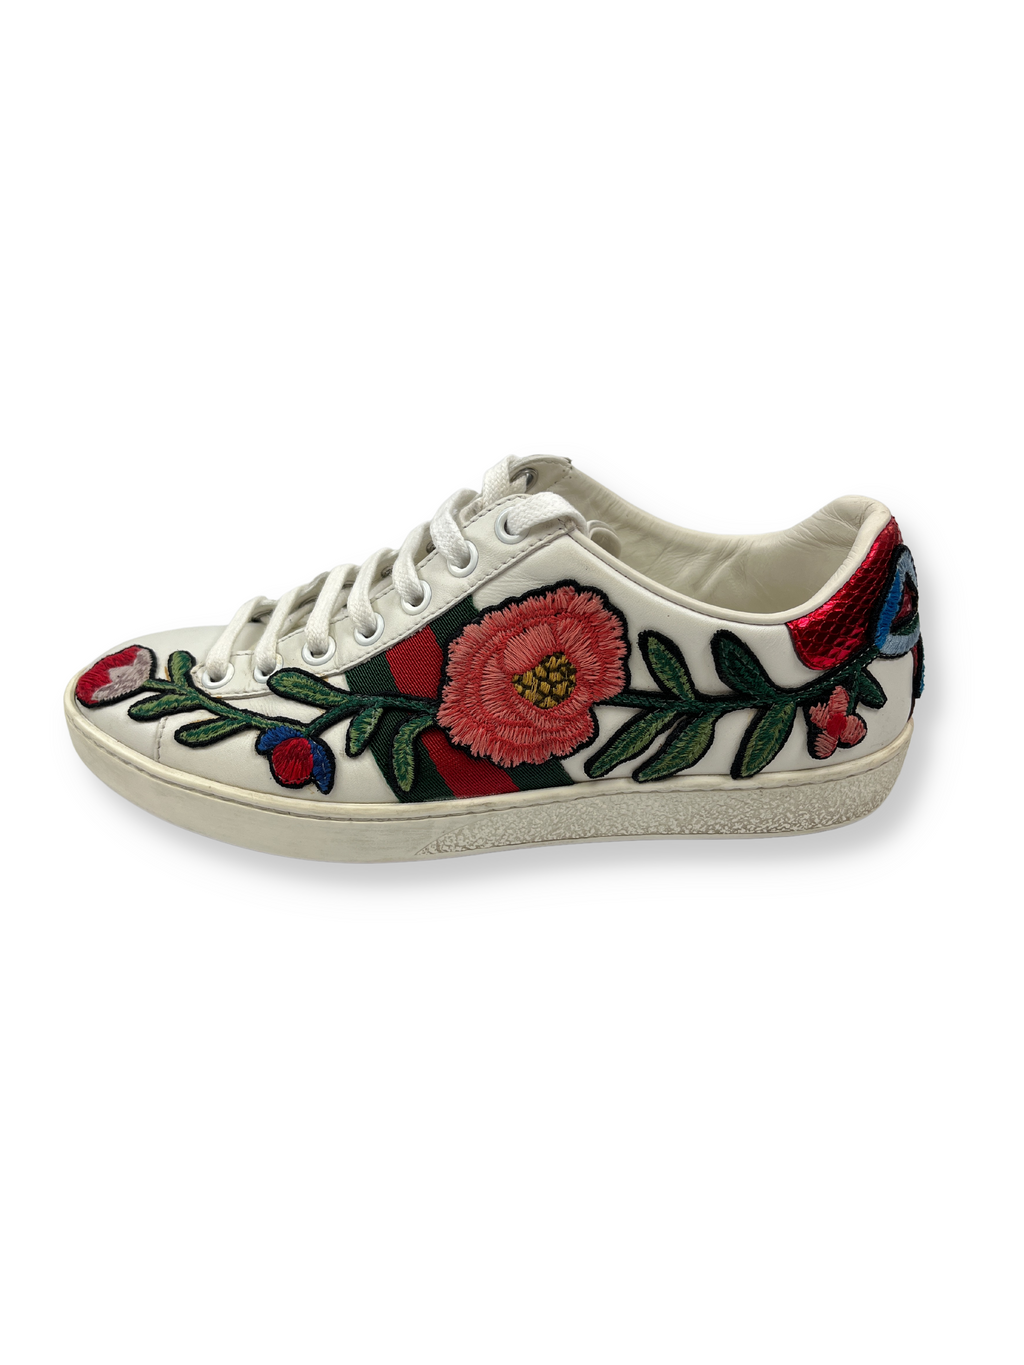 GUCCI - ACE FLORAL EMBROIDERED SNEAKER - SZ 34.5